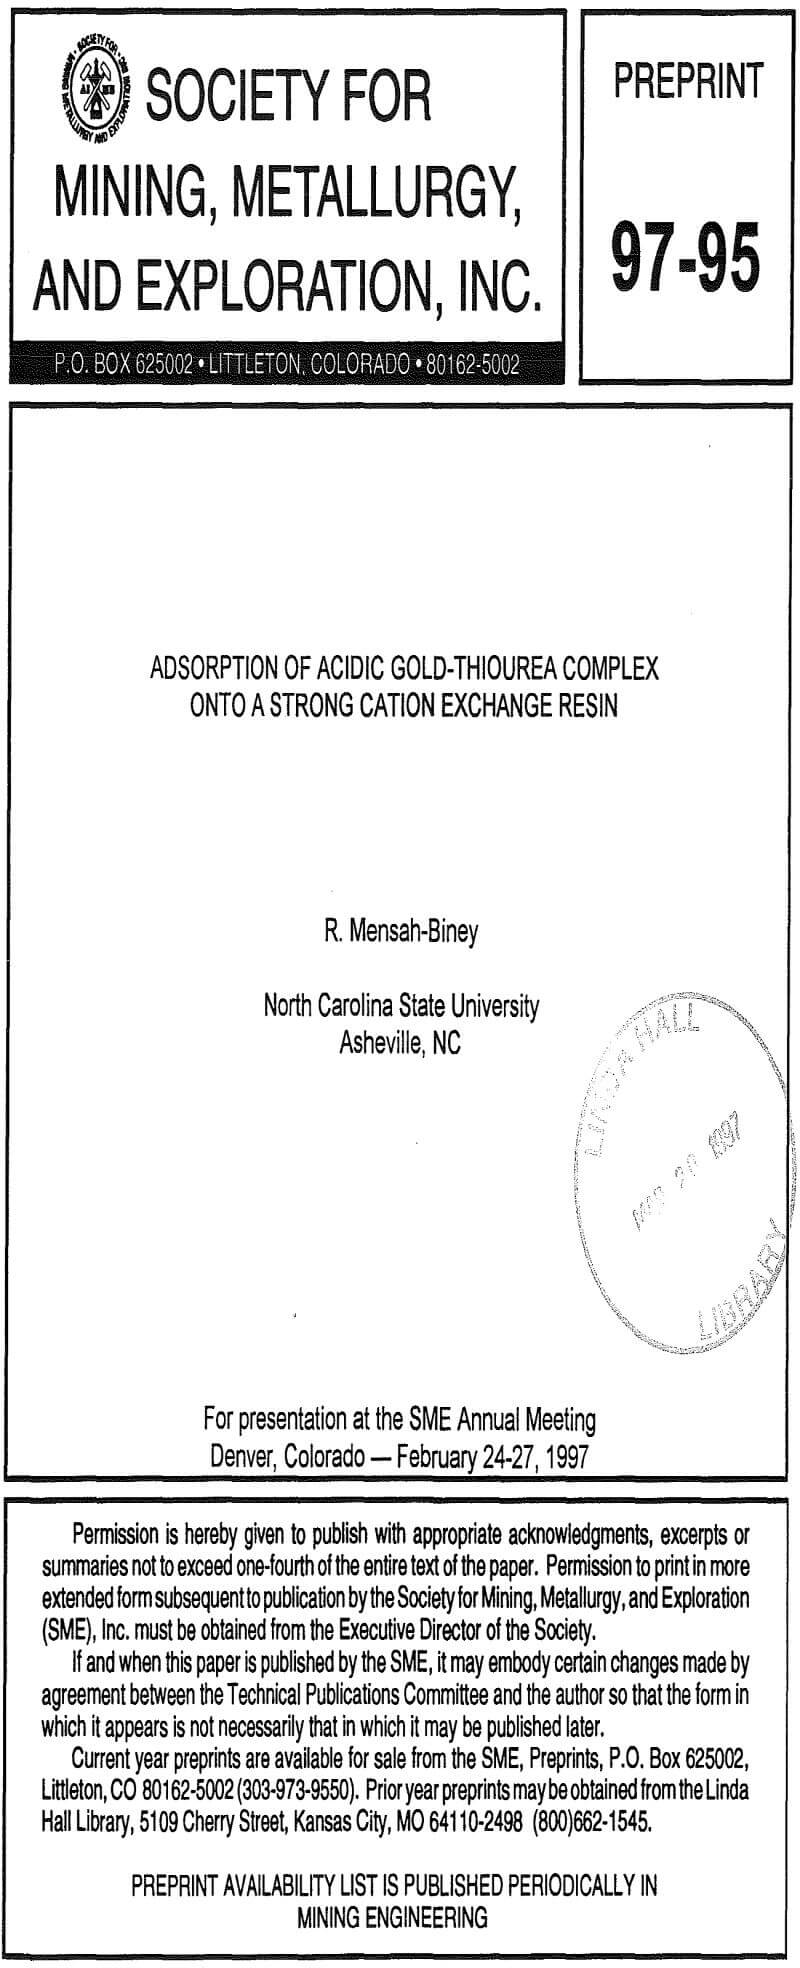 adsorption of acidic gold-thiourea complex onto a strong cation exchange resin